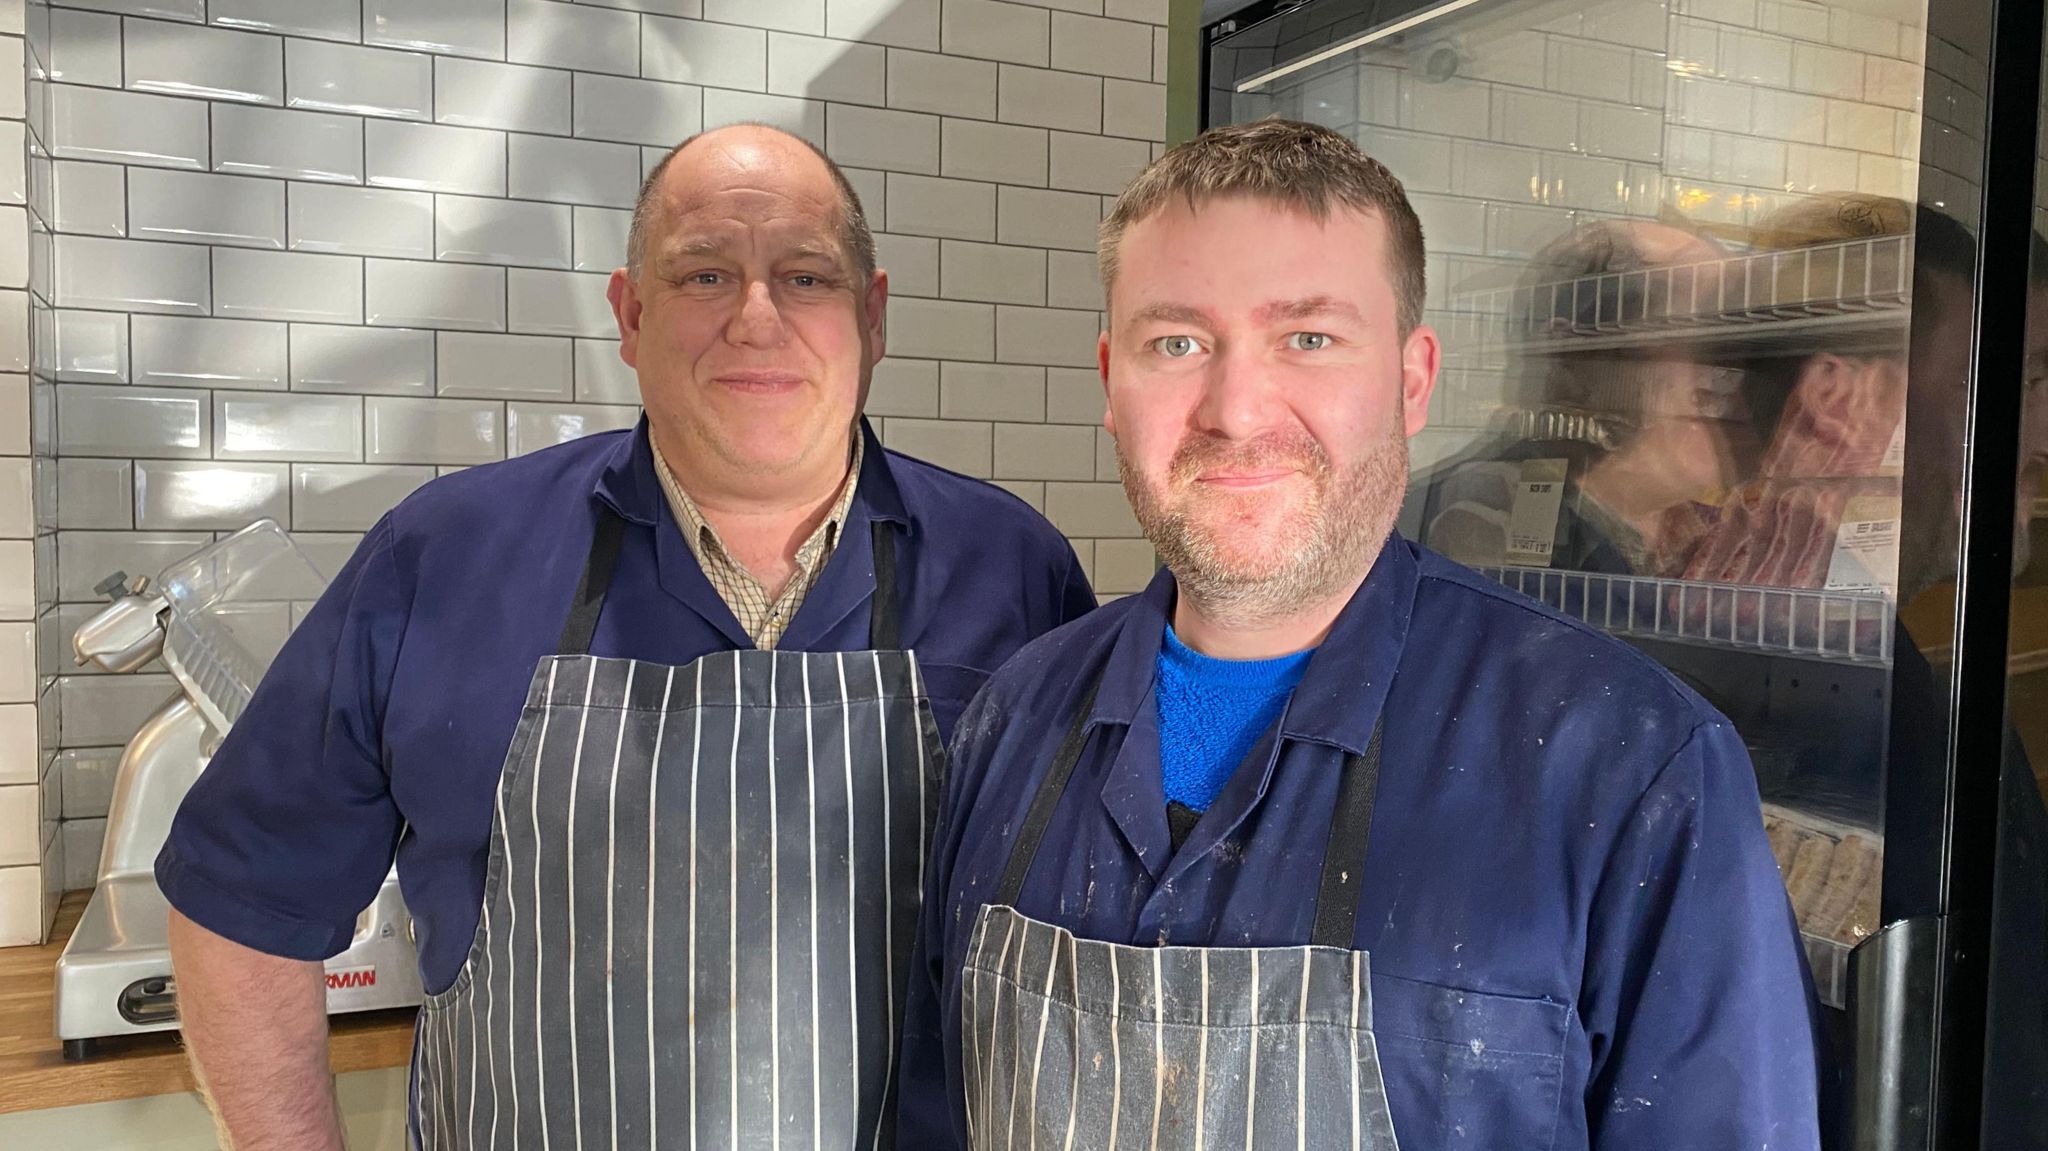 Two butchers standing together, one employer Chris Green, the o ther his apprentice Volodmyr Belei